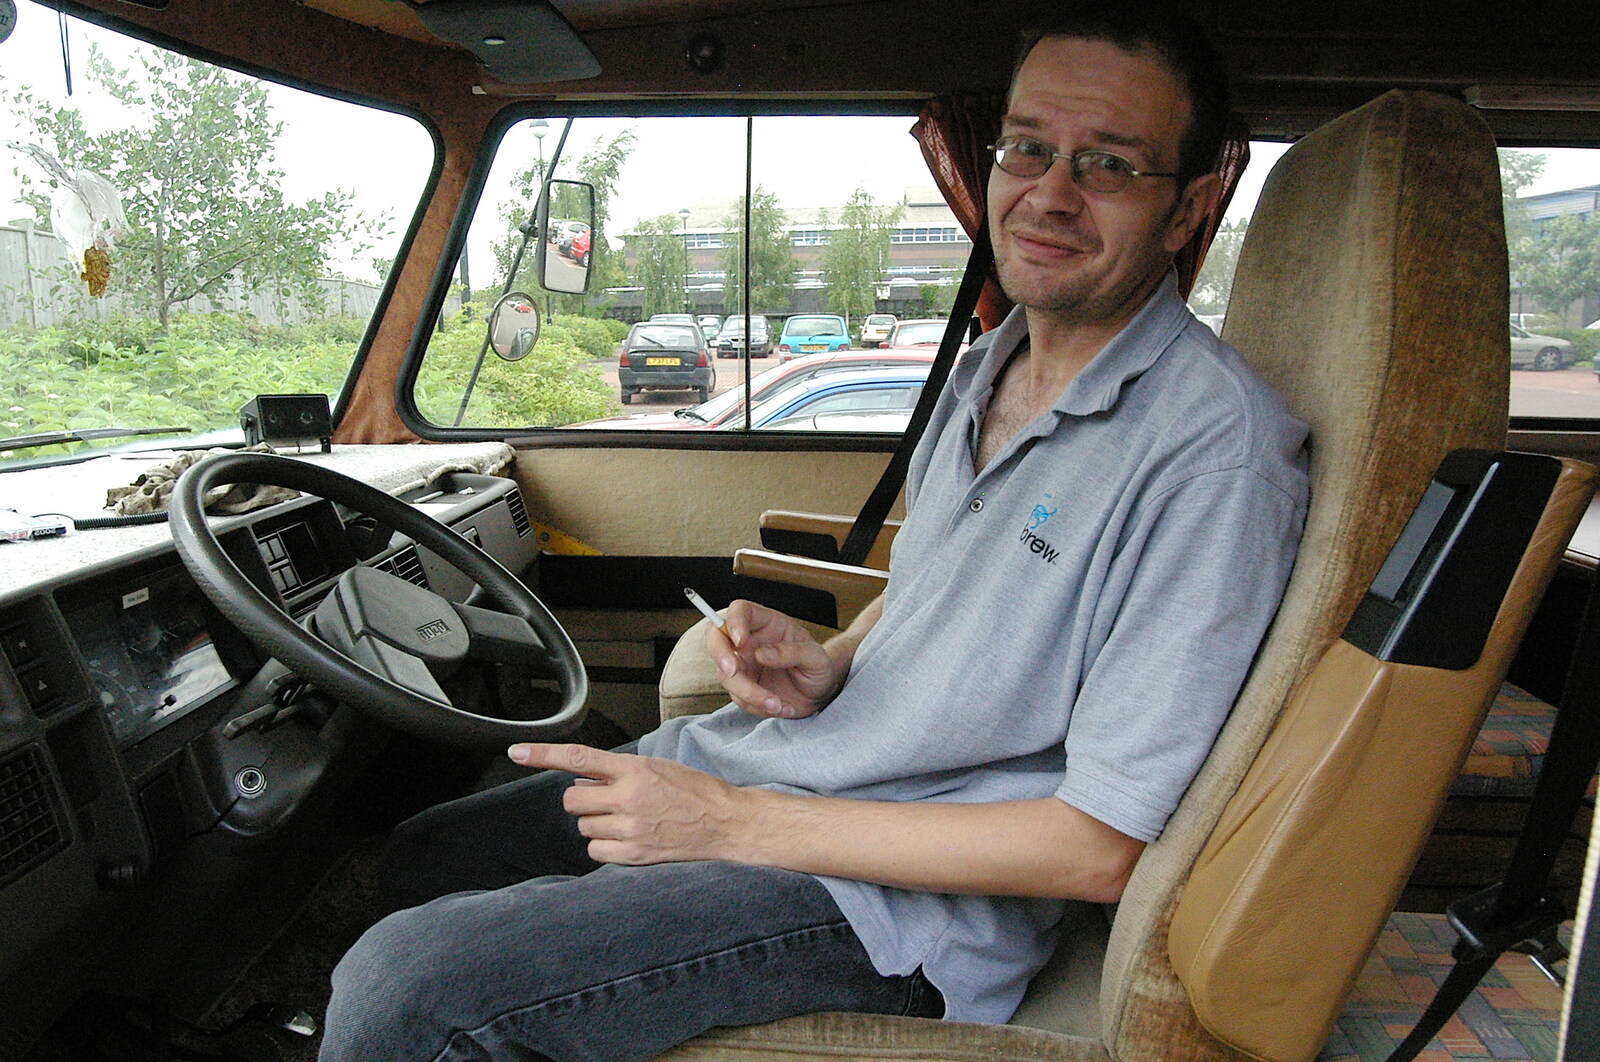 Richard in the driver's seat from Richard Panton's Van and Alex Hill at Revolution Records, Diss and Cambridge - 29th July 2005